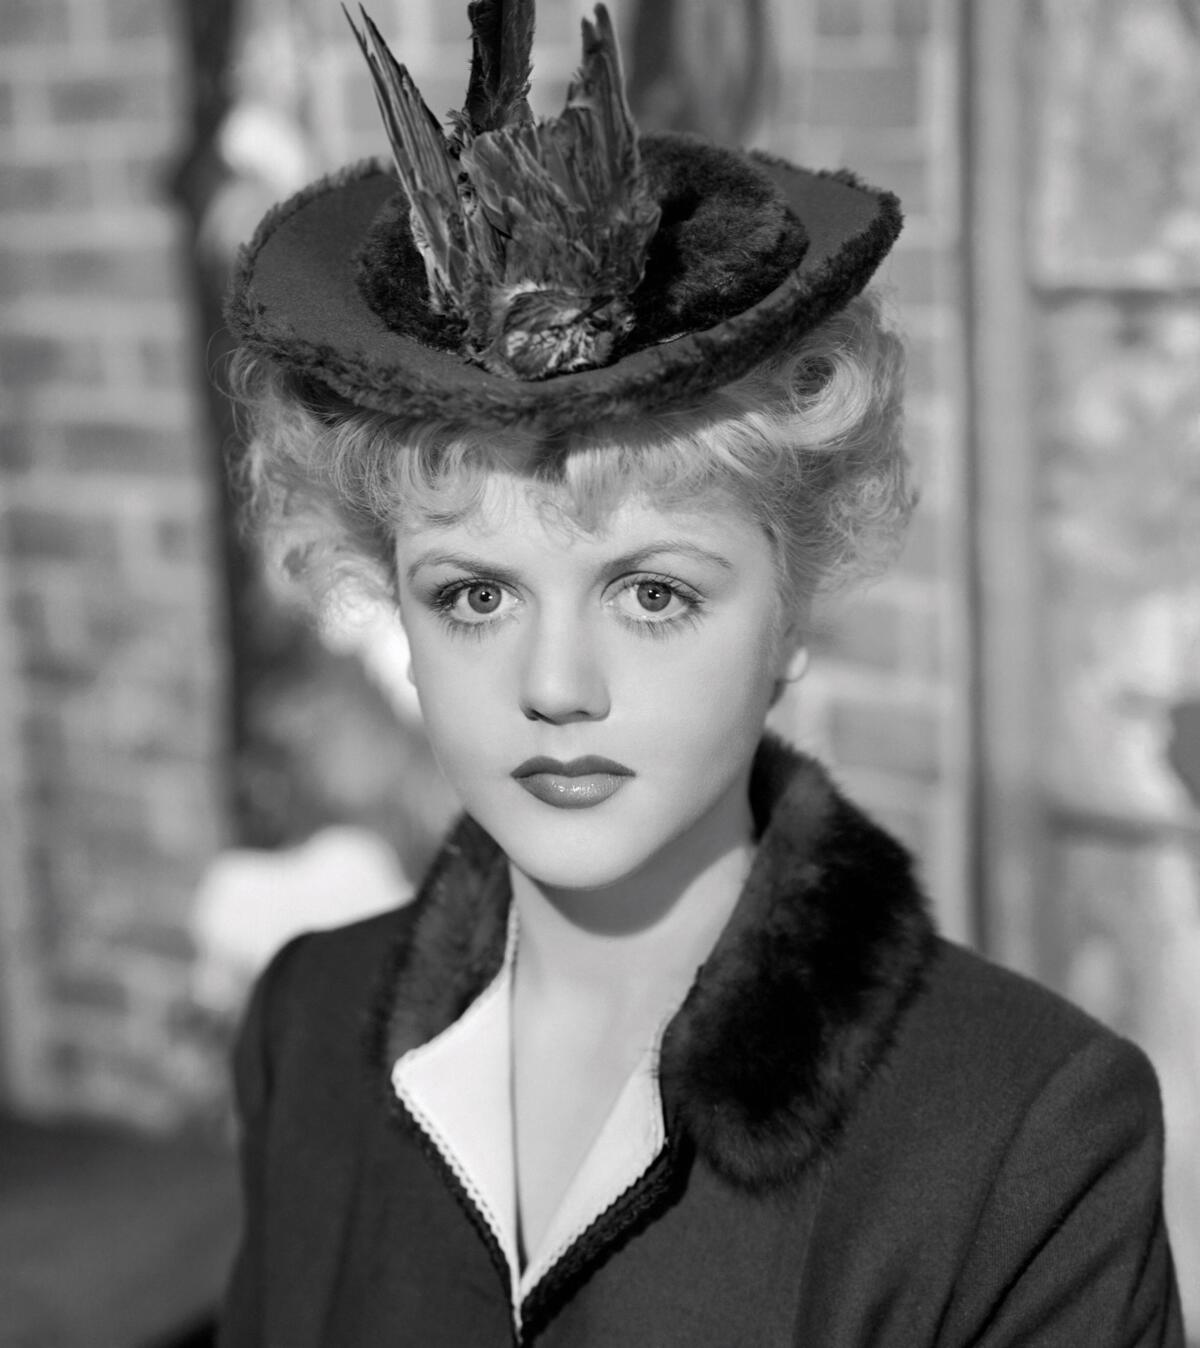 Angela Lansbury wearing a hat decorated with a dead bird in "The Picture of Dorian Gray" (1945)